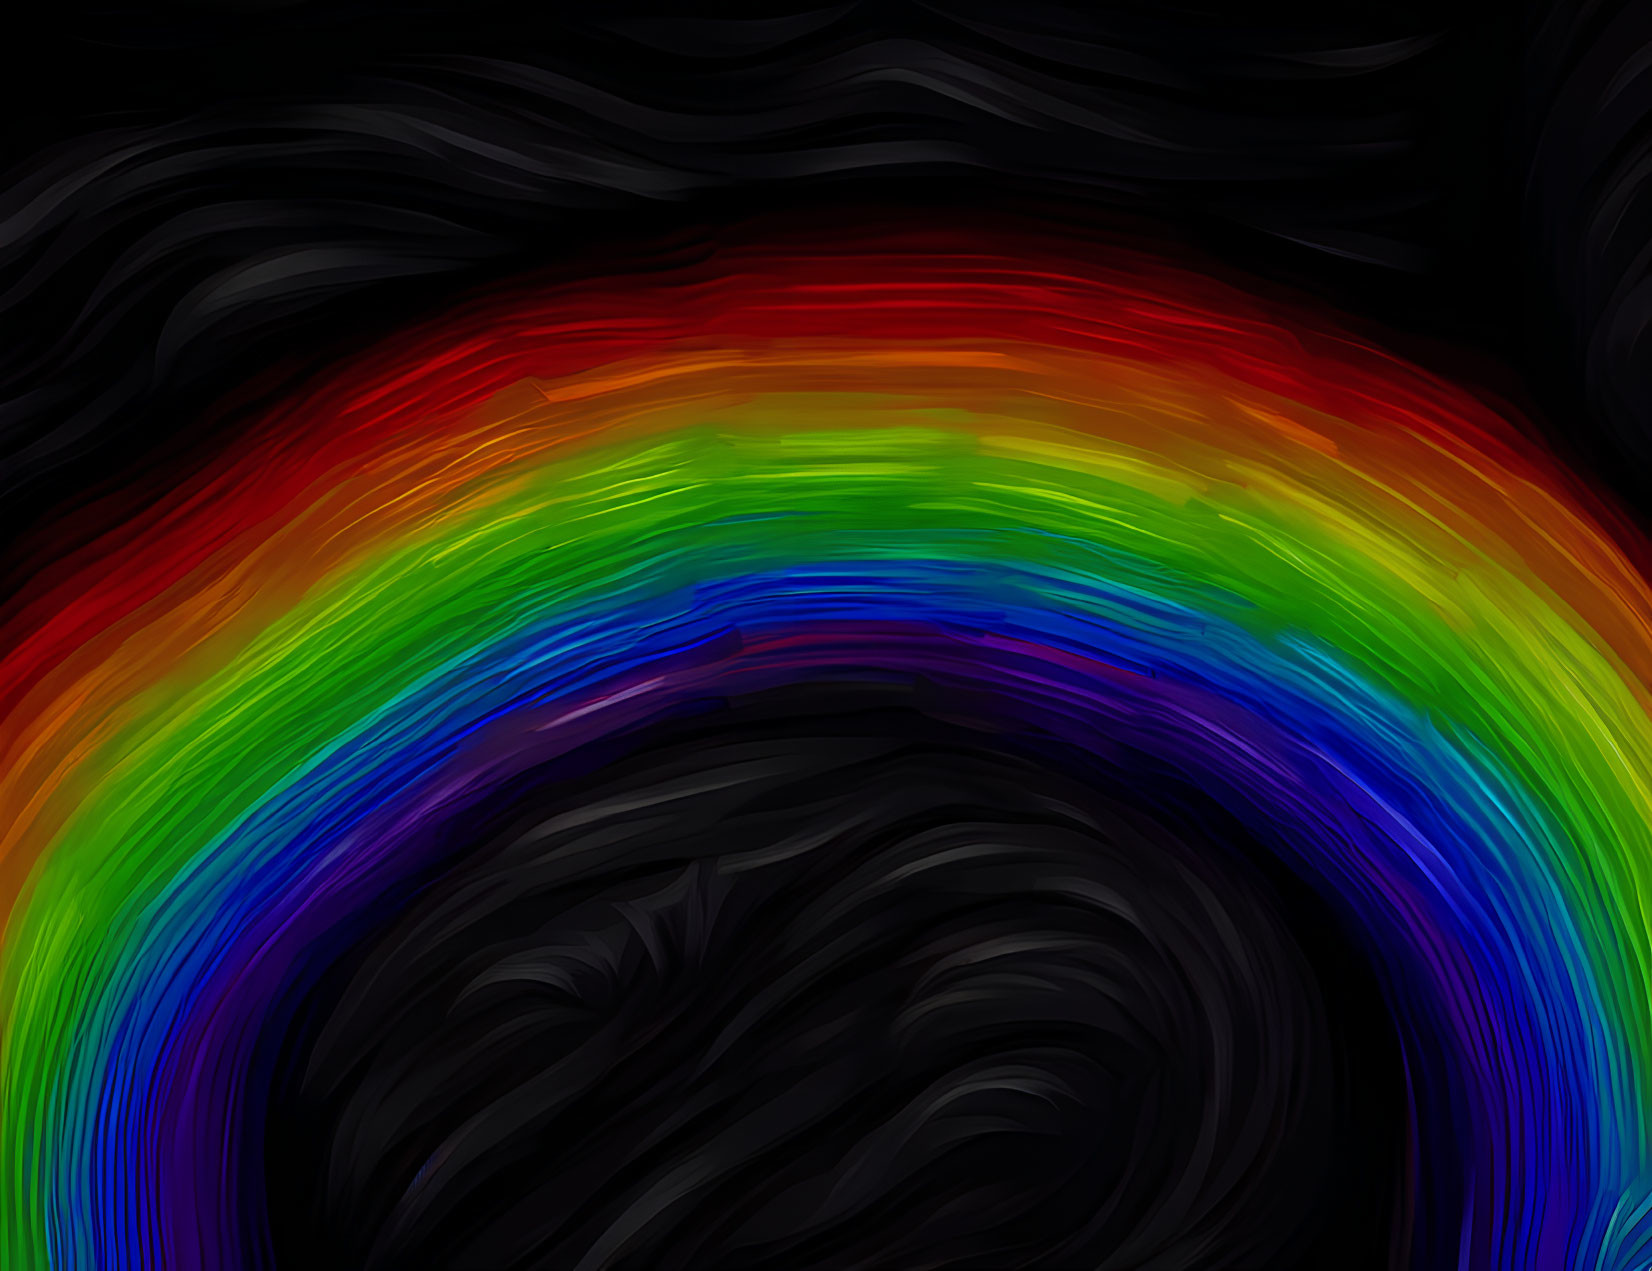 Abstract digital artwork: swirling rainbow colors on dark wave background